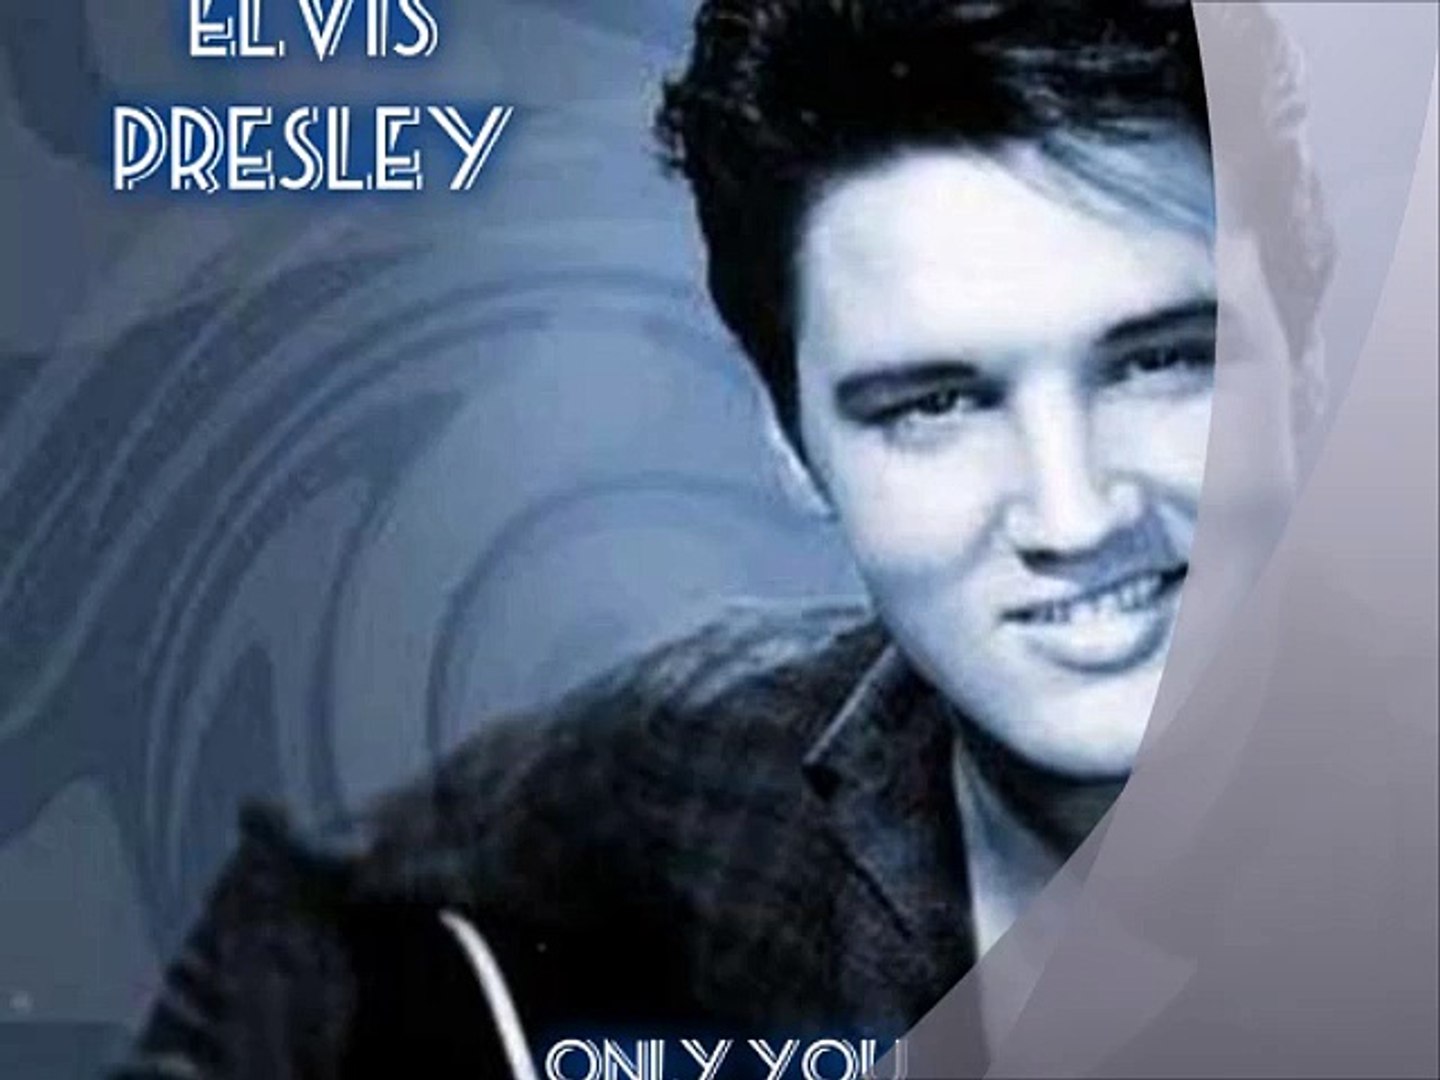 ELVIS PRESLEY - Only you - Video Dailymotion